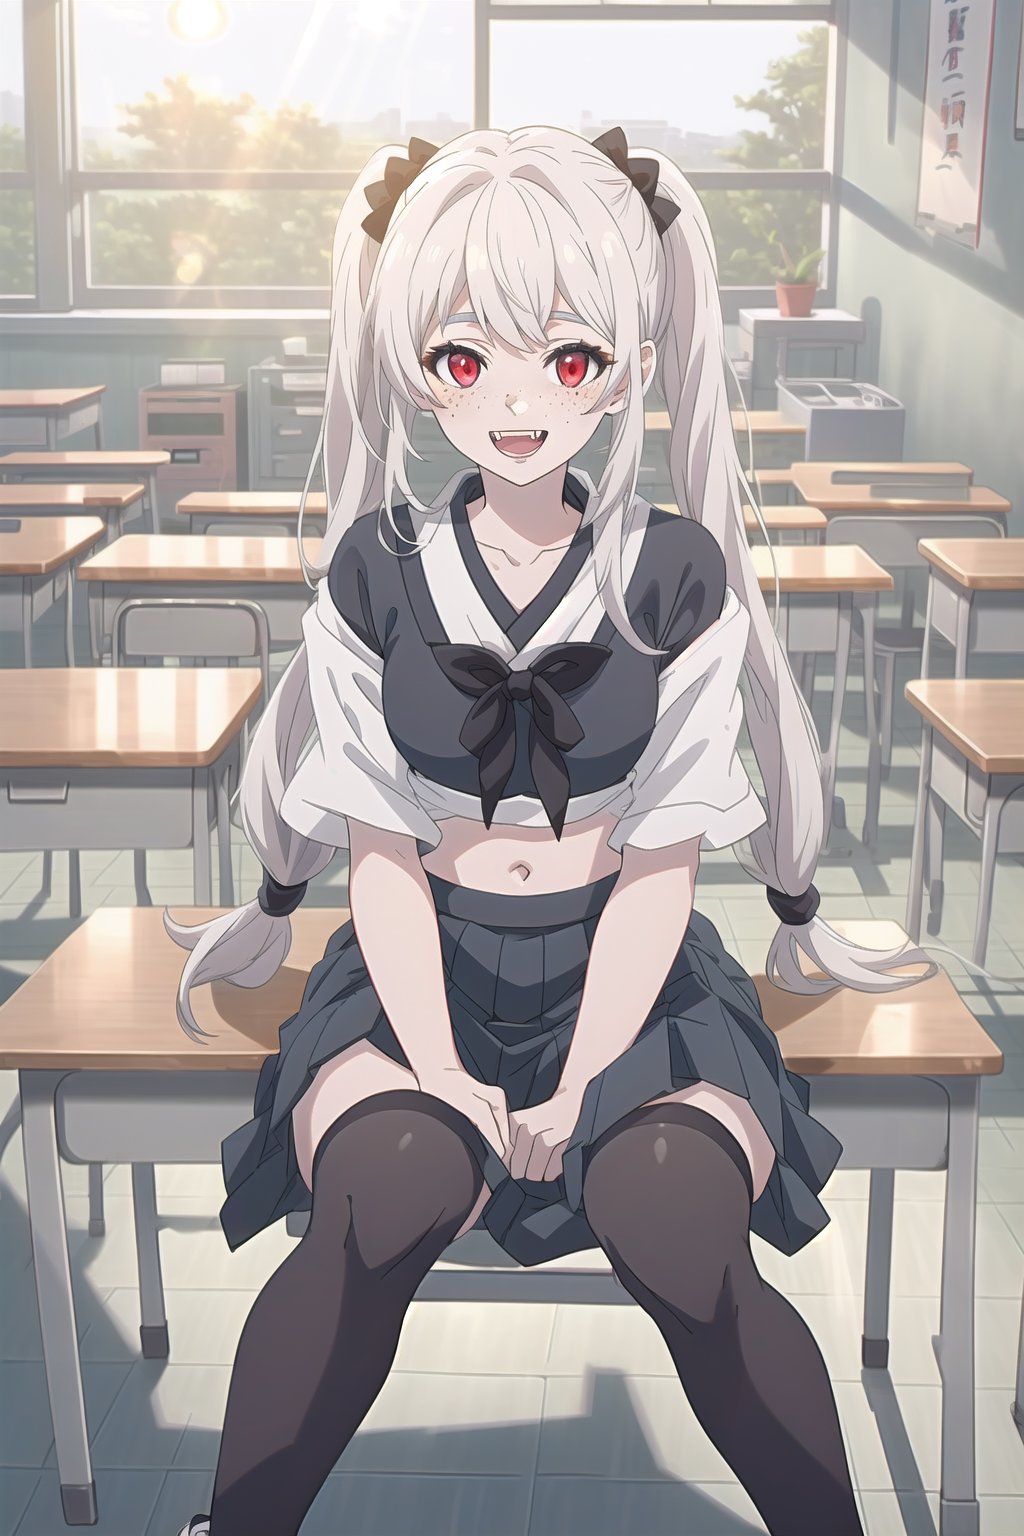 nier anime style illustration, best quality, masterpiece High resolution, good detail, bright colors, HDR, 4K. Dolby vision high.

Albino girl with long straight hair, long twin pigtails, freckles, blushing, red eyes 
 

Crop top (black color mixed with white color) Japanese schoolboy style 

Showing navel, exposed navel

White Japanese school skirt

black stockings 

(black and white tennis shoes)

Inside a Japanese school 

Inside a classroom

Sitting

selfie pose  

Sunrise

Sun rays coming through the window 

Showing fangs, exposed fangs


Flirtatious smile (yandere smile). Happy, excited. Open mouth


Students sitting at desks,nier anime style